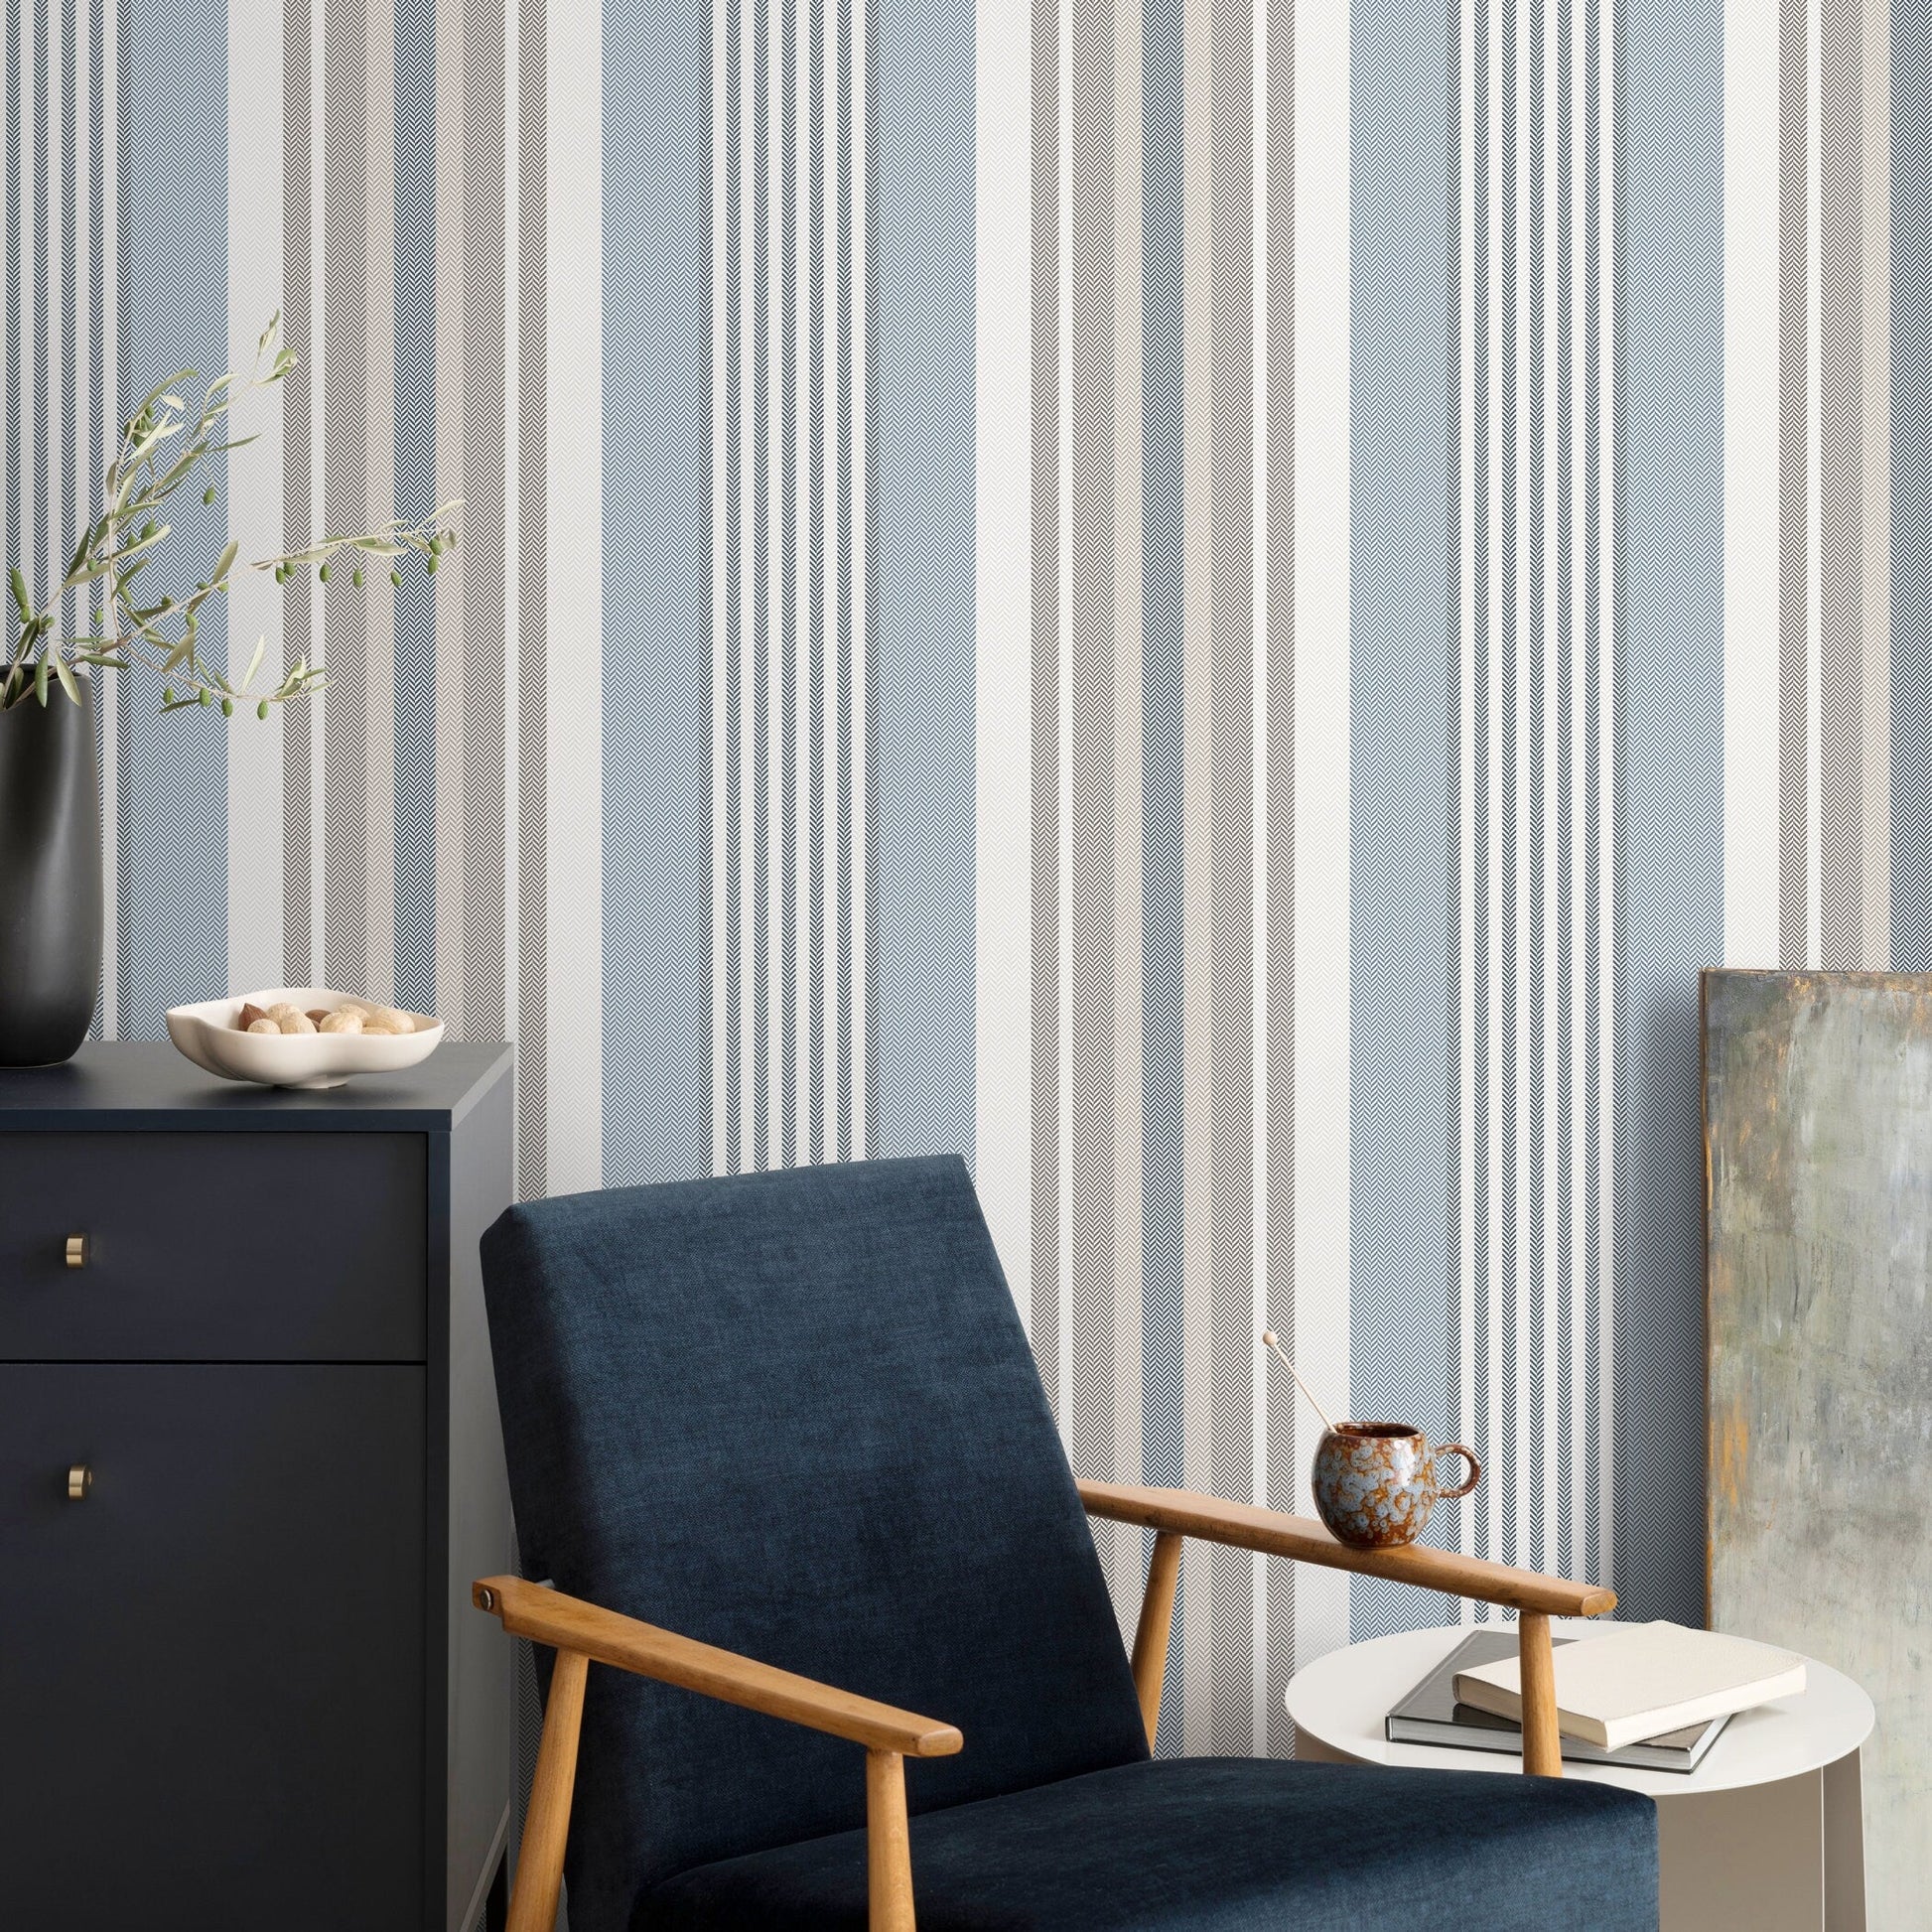 Geometric Striped Wallpaper Farmhouse Wallpaper Peel and Stick and Traditional Wallpaper - D850